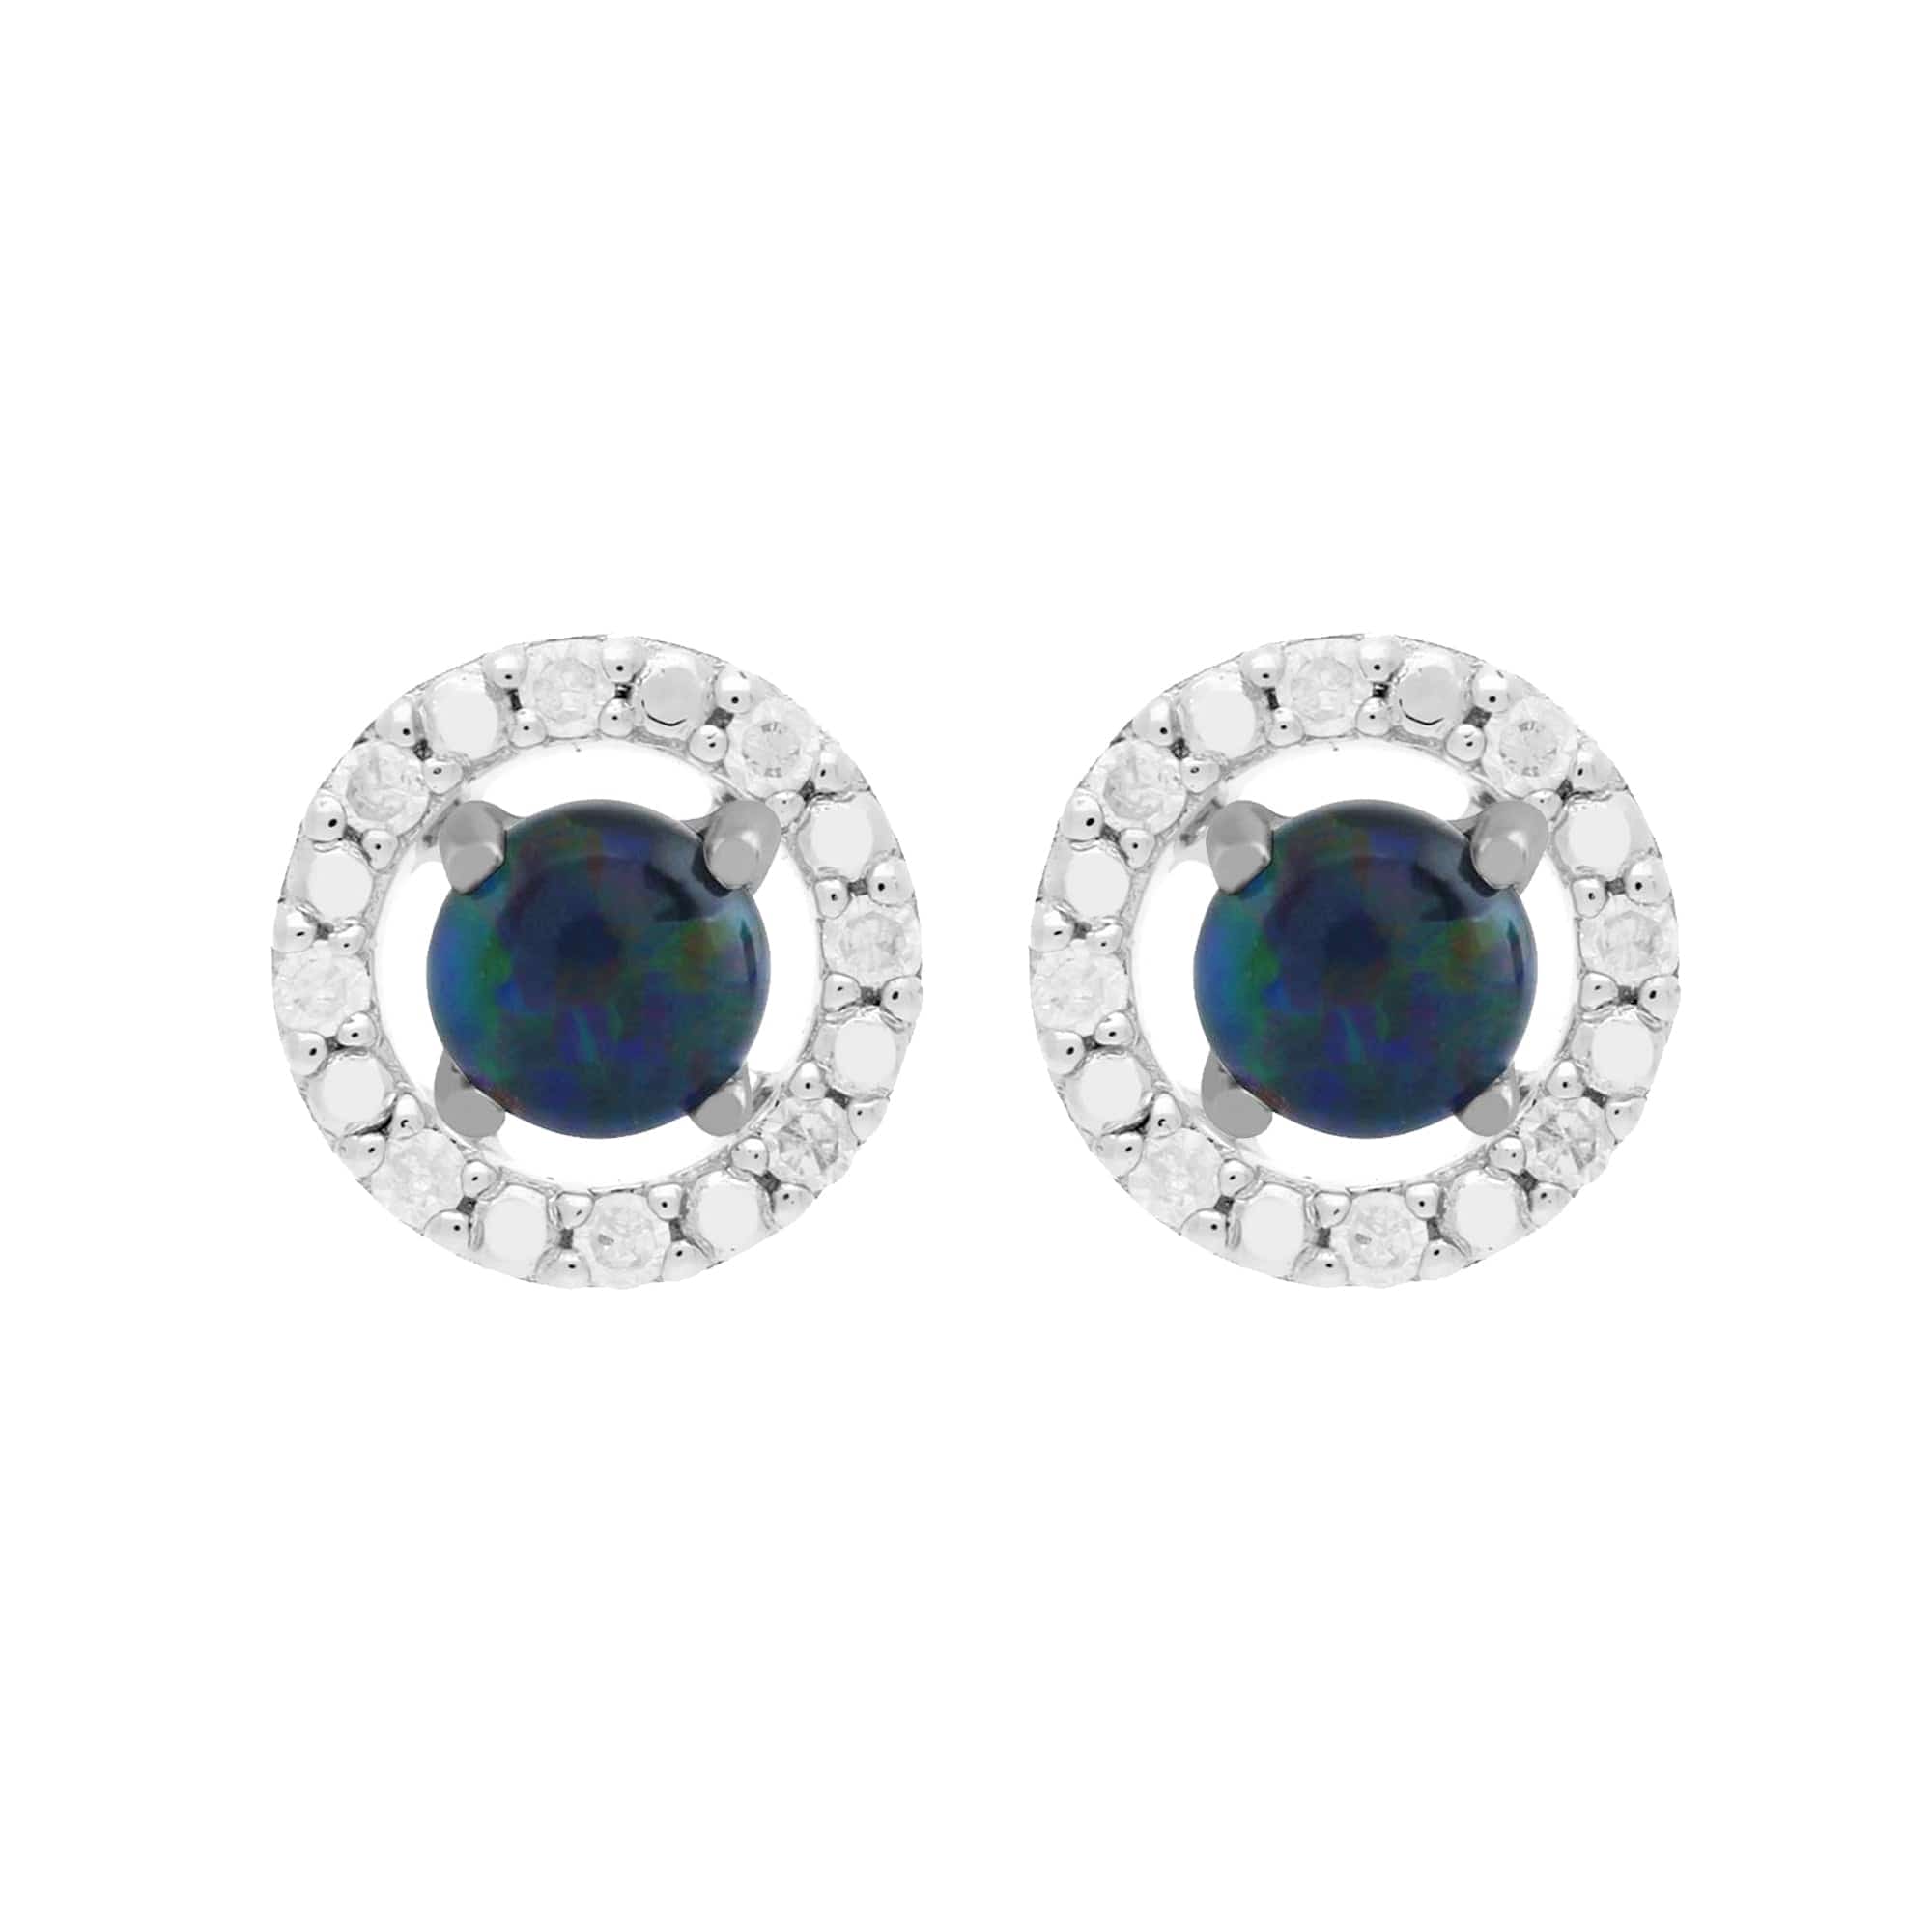 162E0071209-162E0228019 Classic Round Triplet Opal Stud Earrings with Detachable Diamond Round Ear Jacket in 9ct White Gold 1